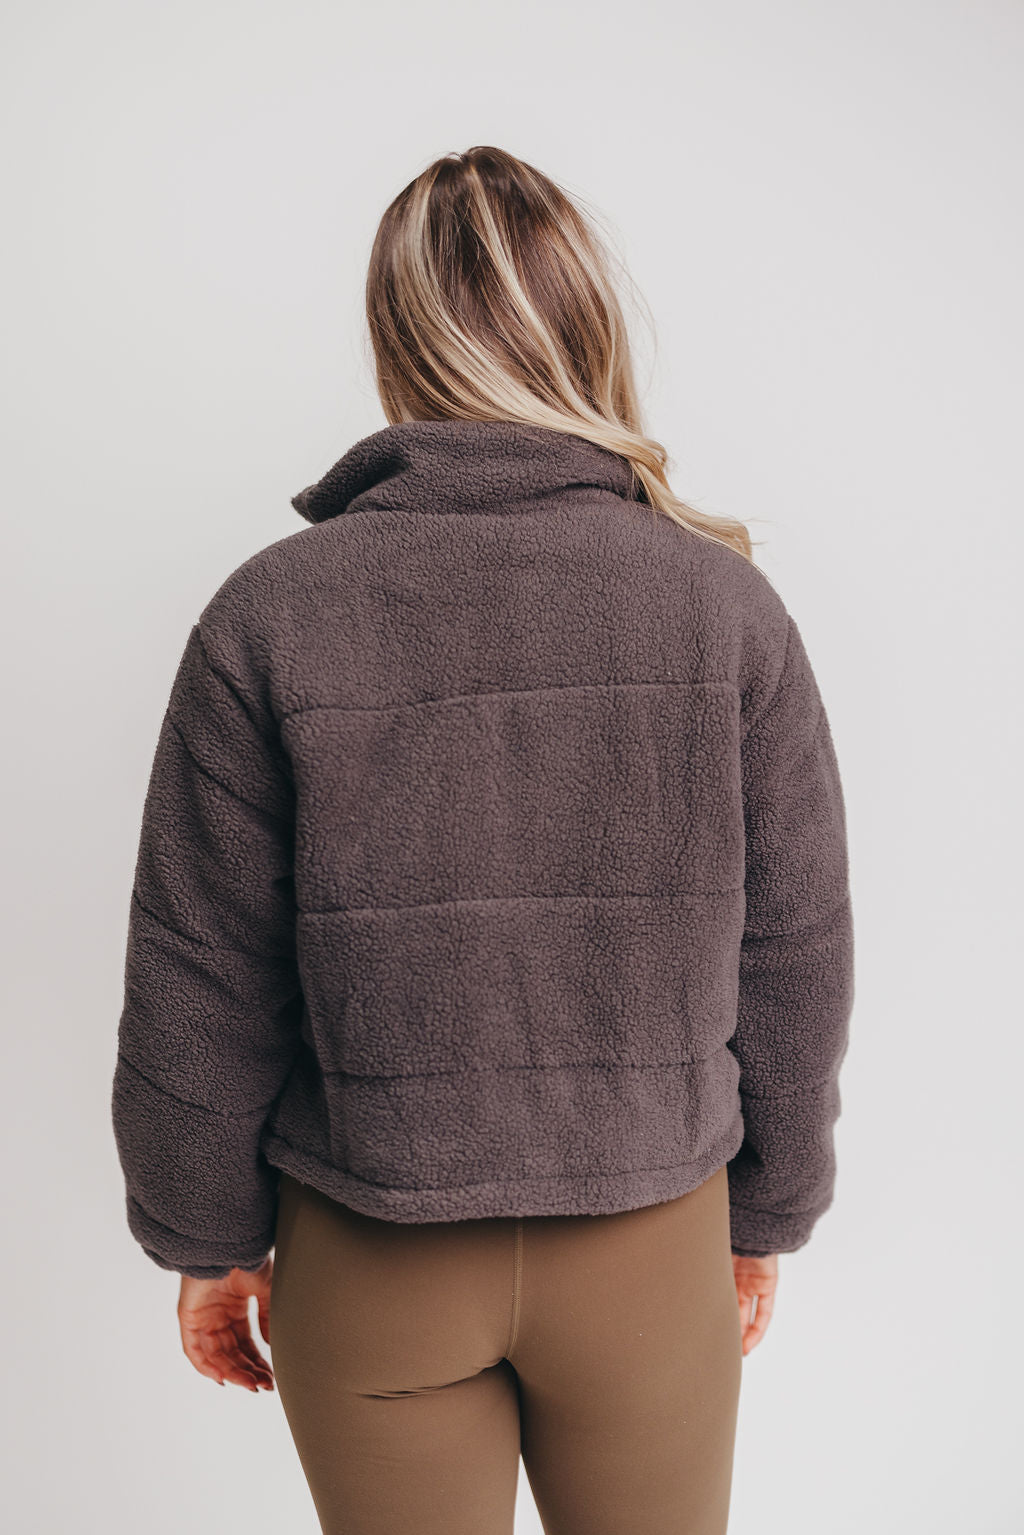 The Candice Jacket in Charcoal